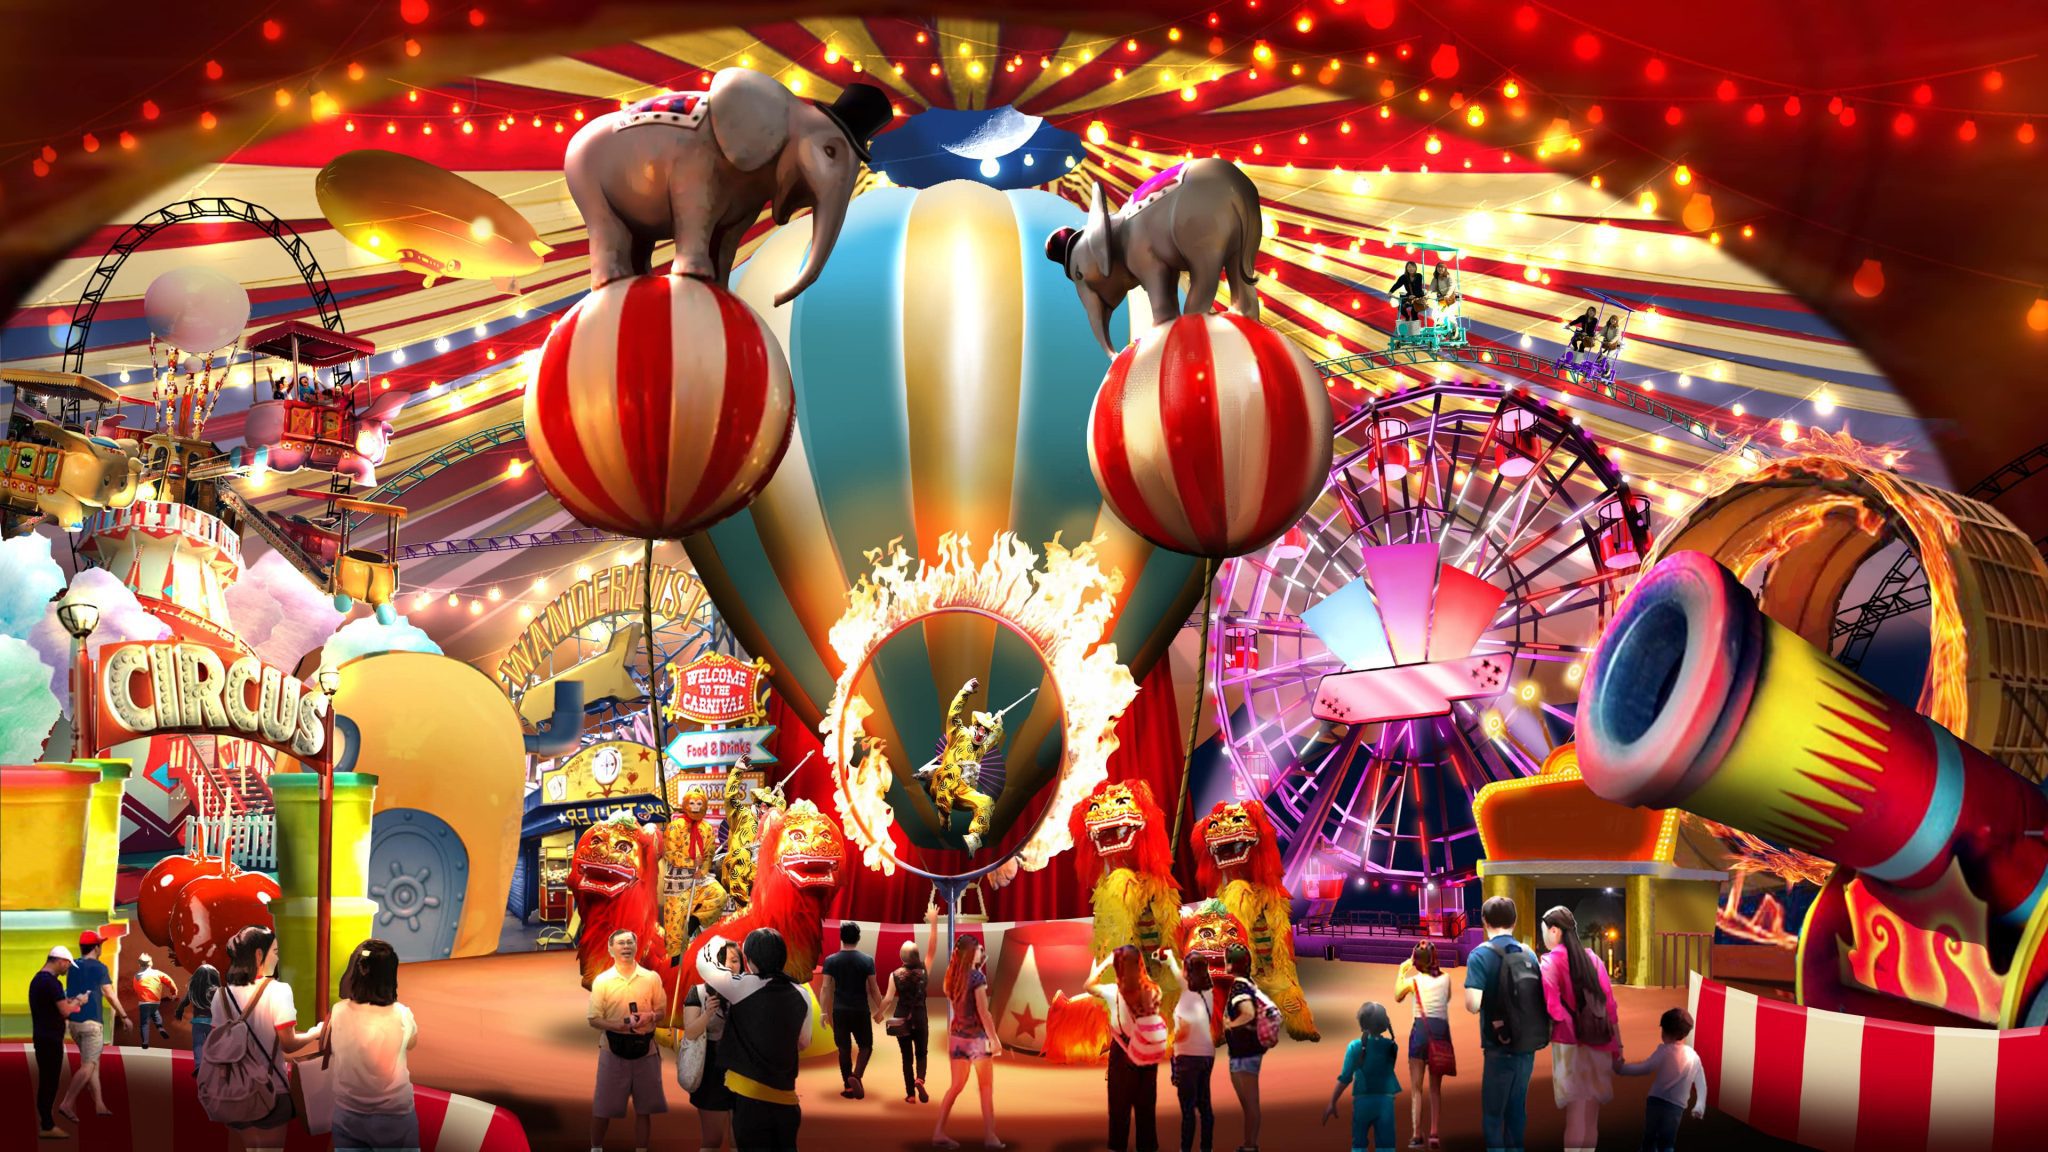 An image of a circus for family entertainment.